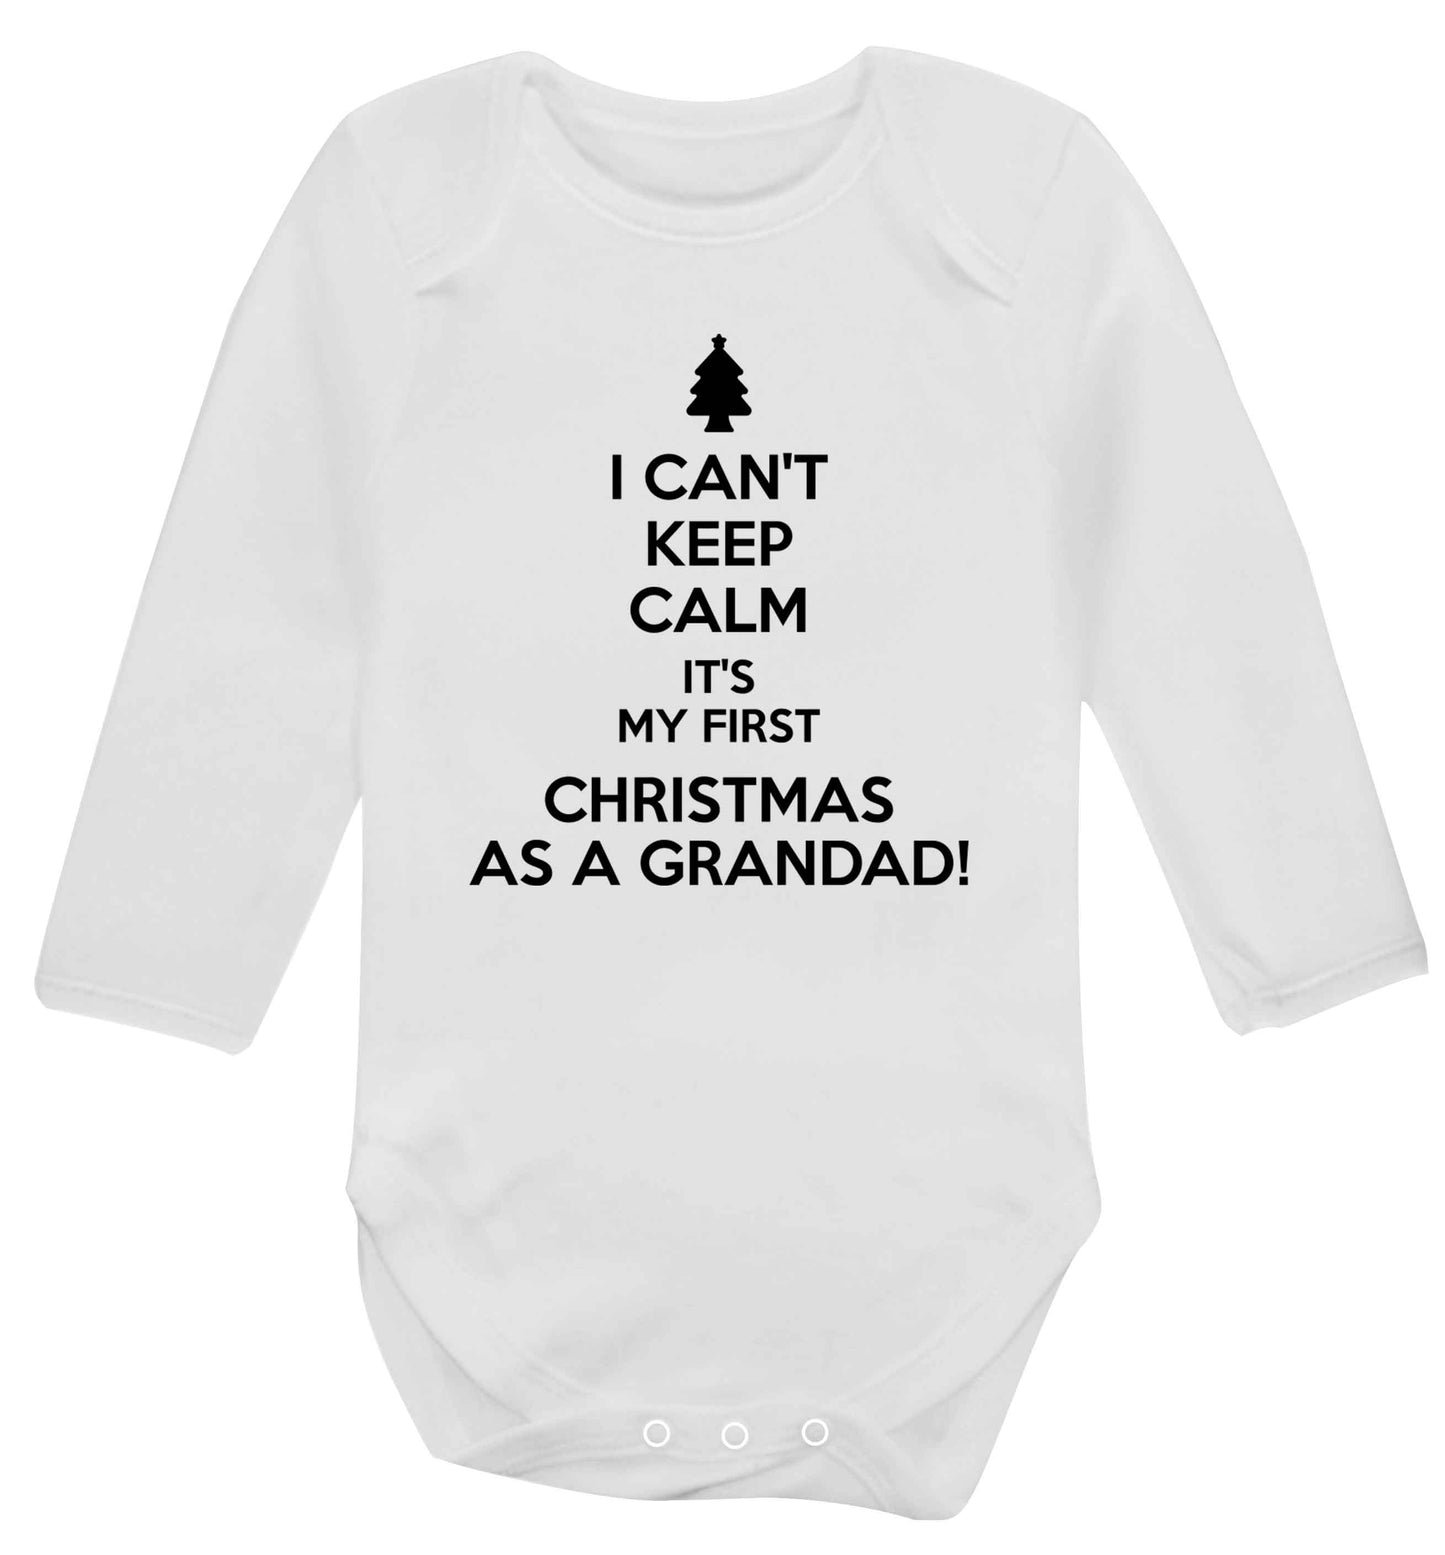 I can't keep calm it's my first Christmas as a grandad! Baby Vest long sleeved white 6-12 months